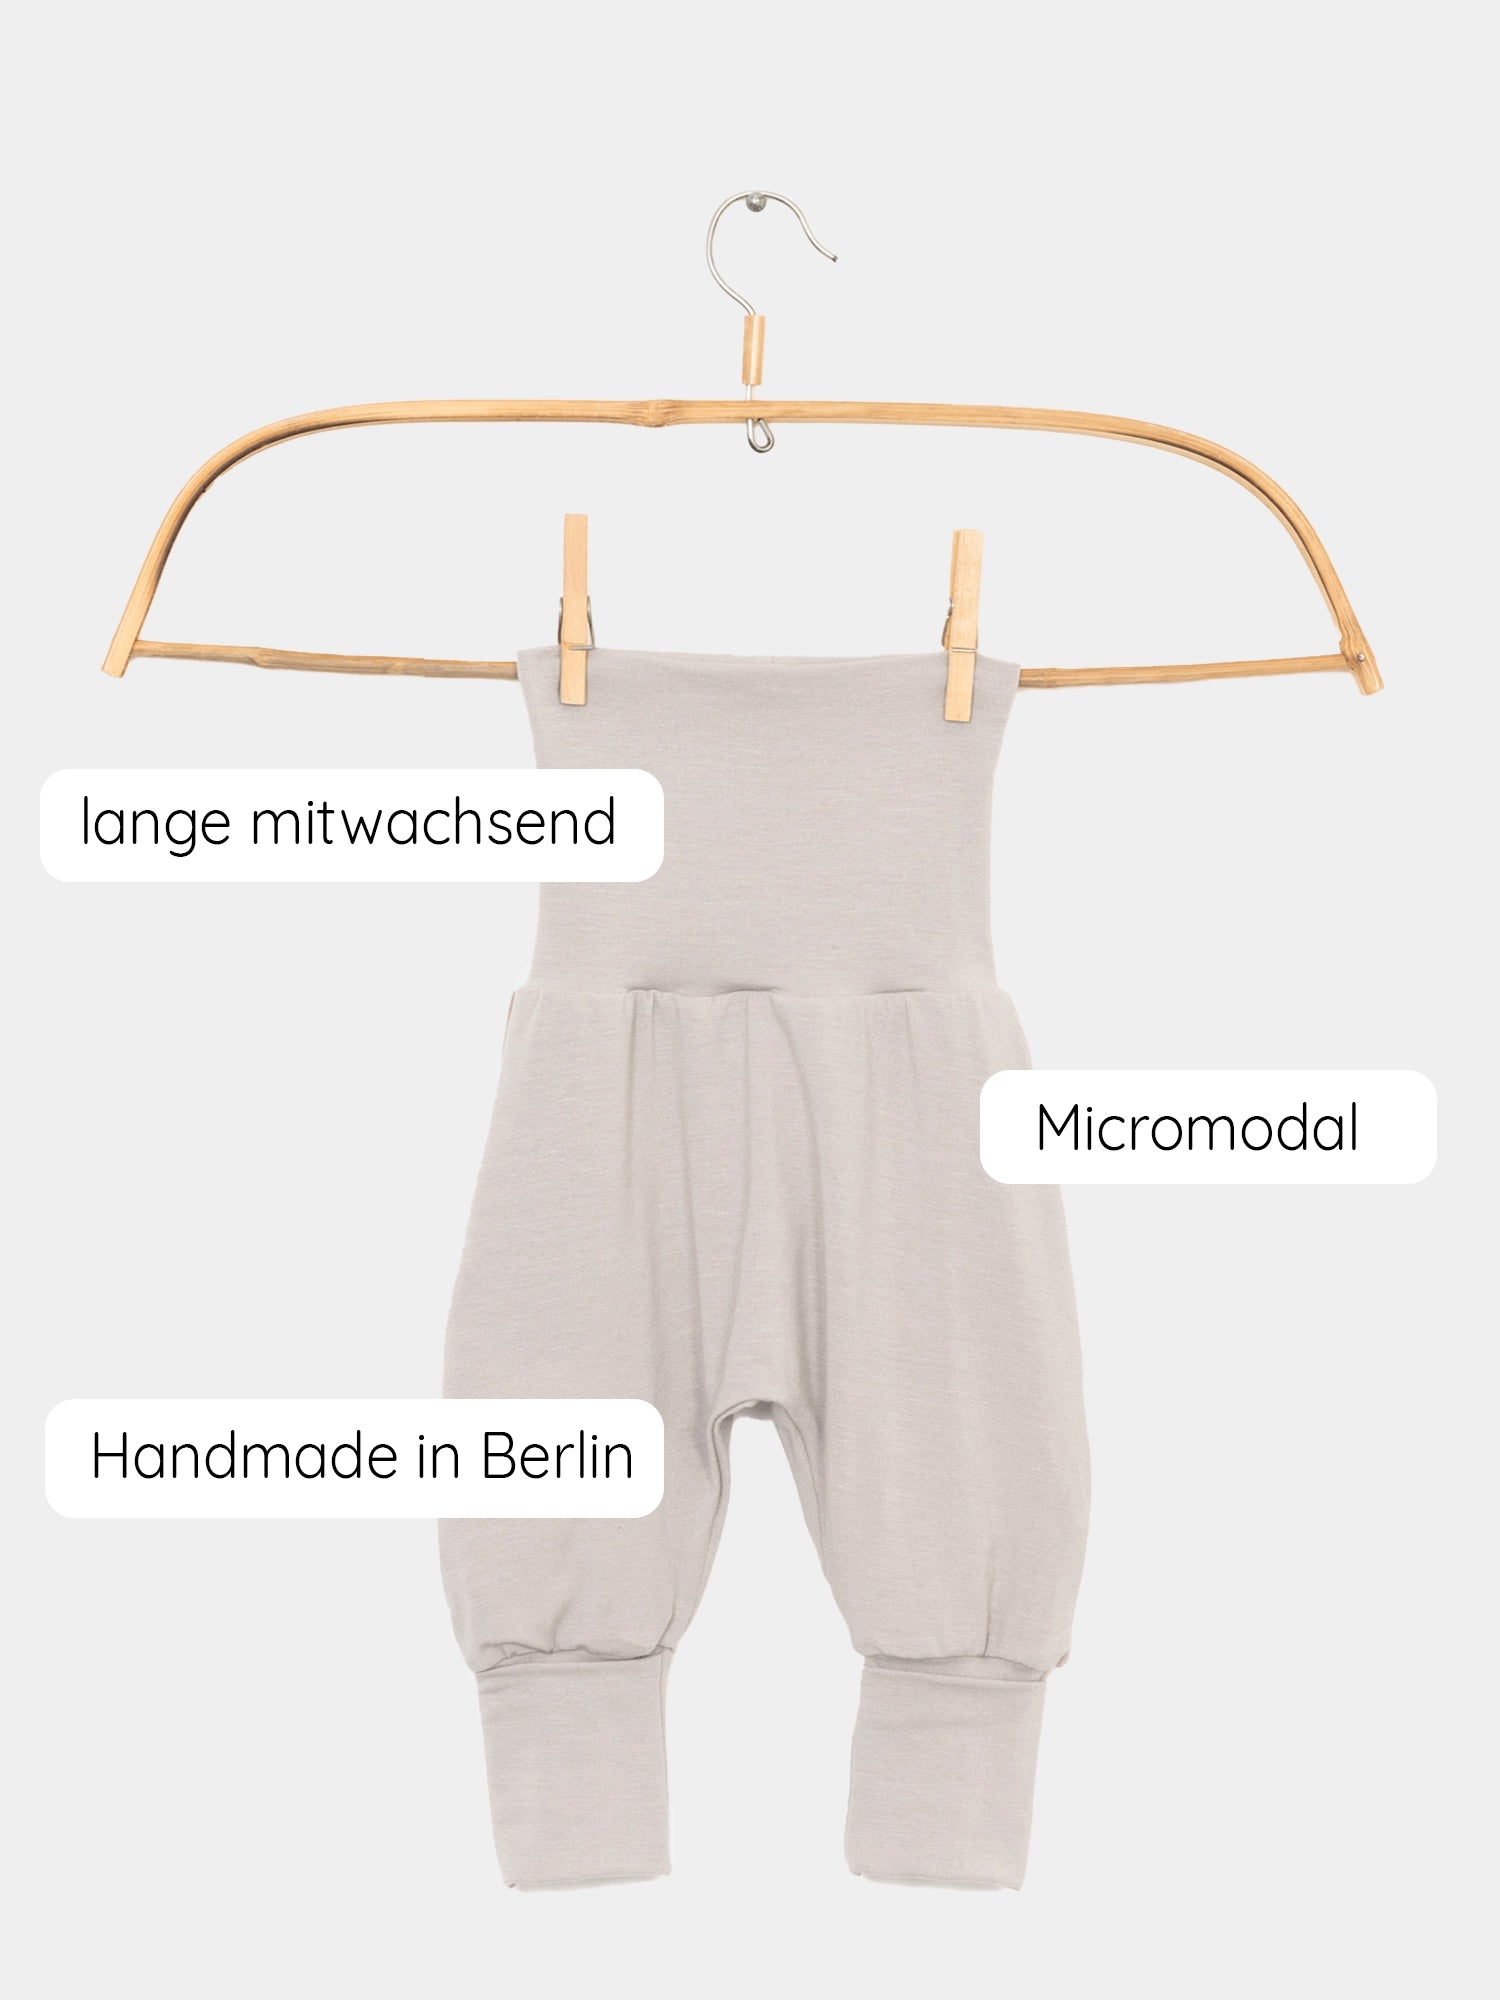 Baby knicker made of micromodal - stone